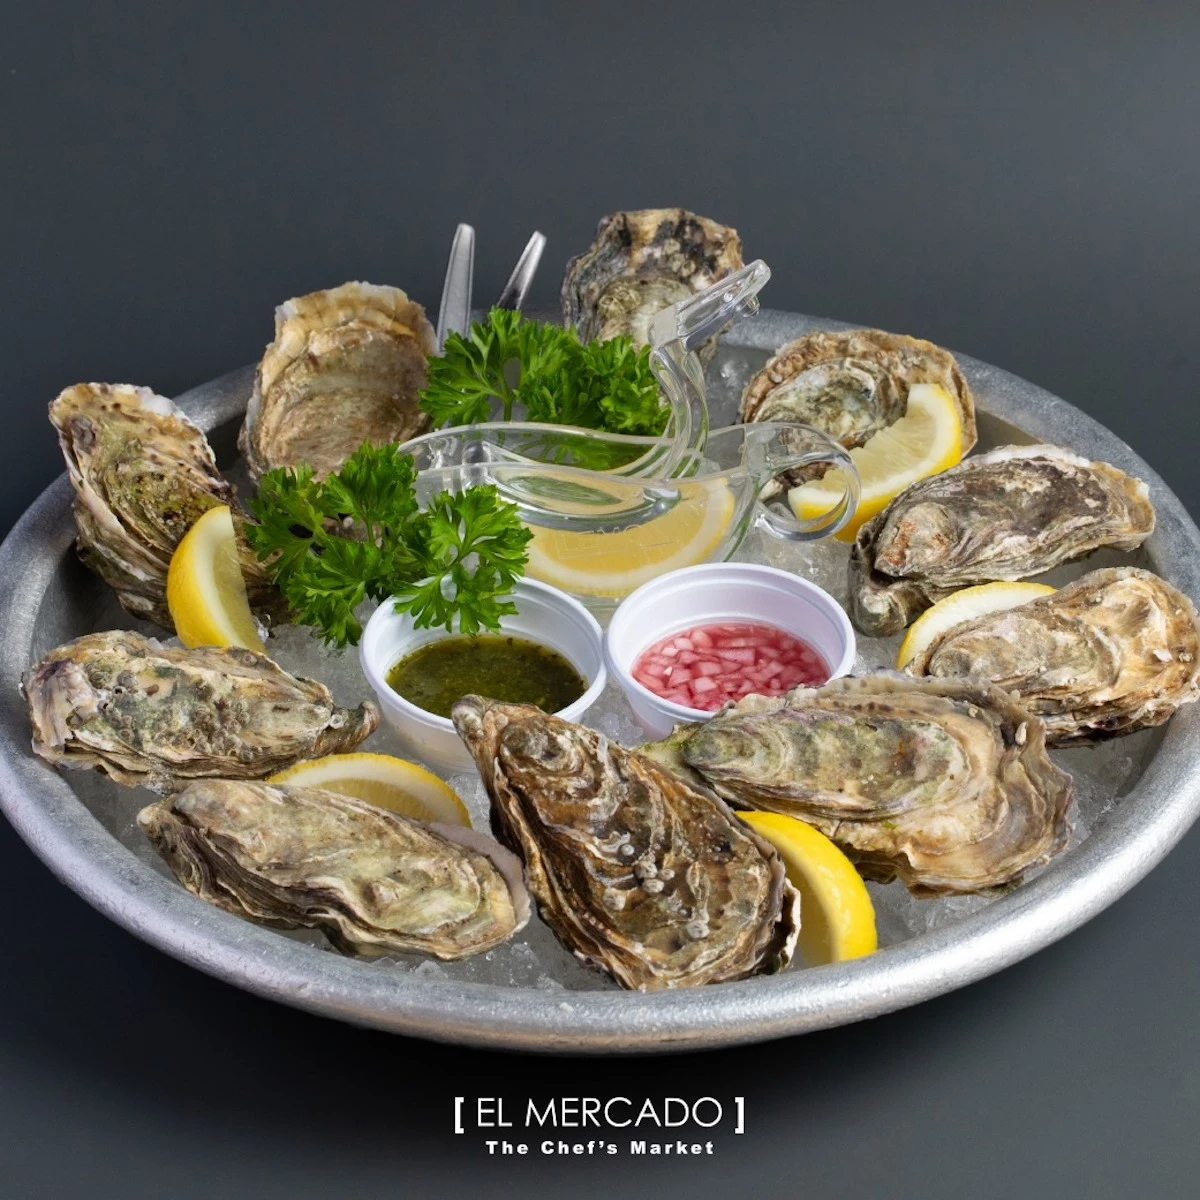 We can see fresh an oyster platter with lemon slices and sauces in El Mercado market restaurant in Bangkok.